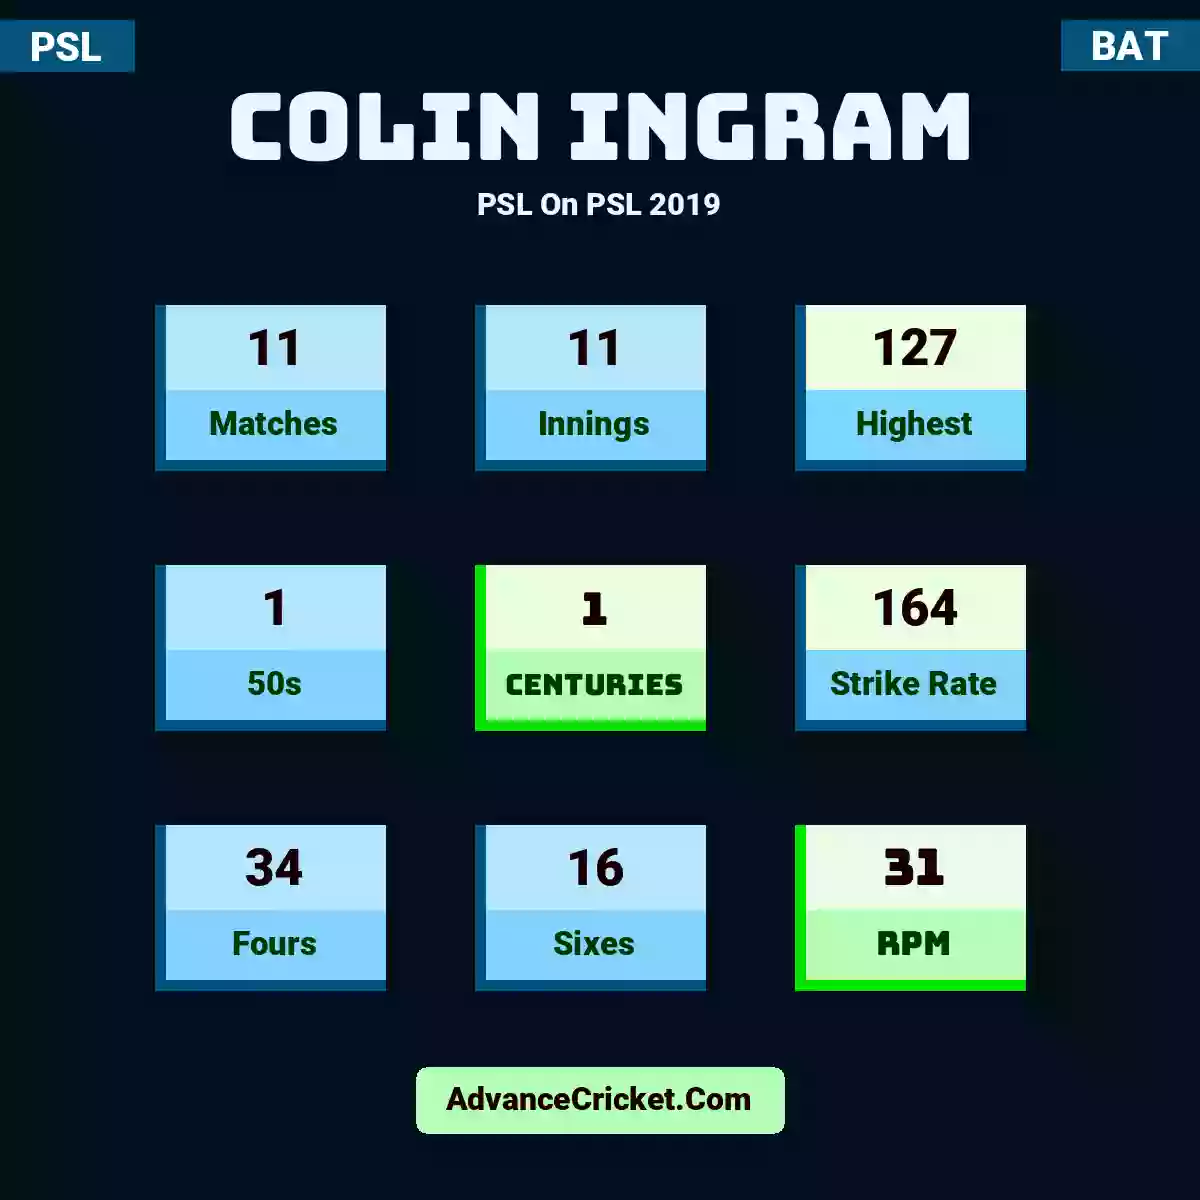 Colin Ingram PSL  On PSL 2019, Colin Ingram played 11 matches, scored 127 runs as highest, 1 half-centuries, and 1 centuries, with a strike rate of 164. C.Ingram hit 34 fours and 16 sixes, with an RPM of 31.